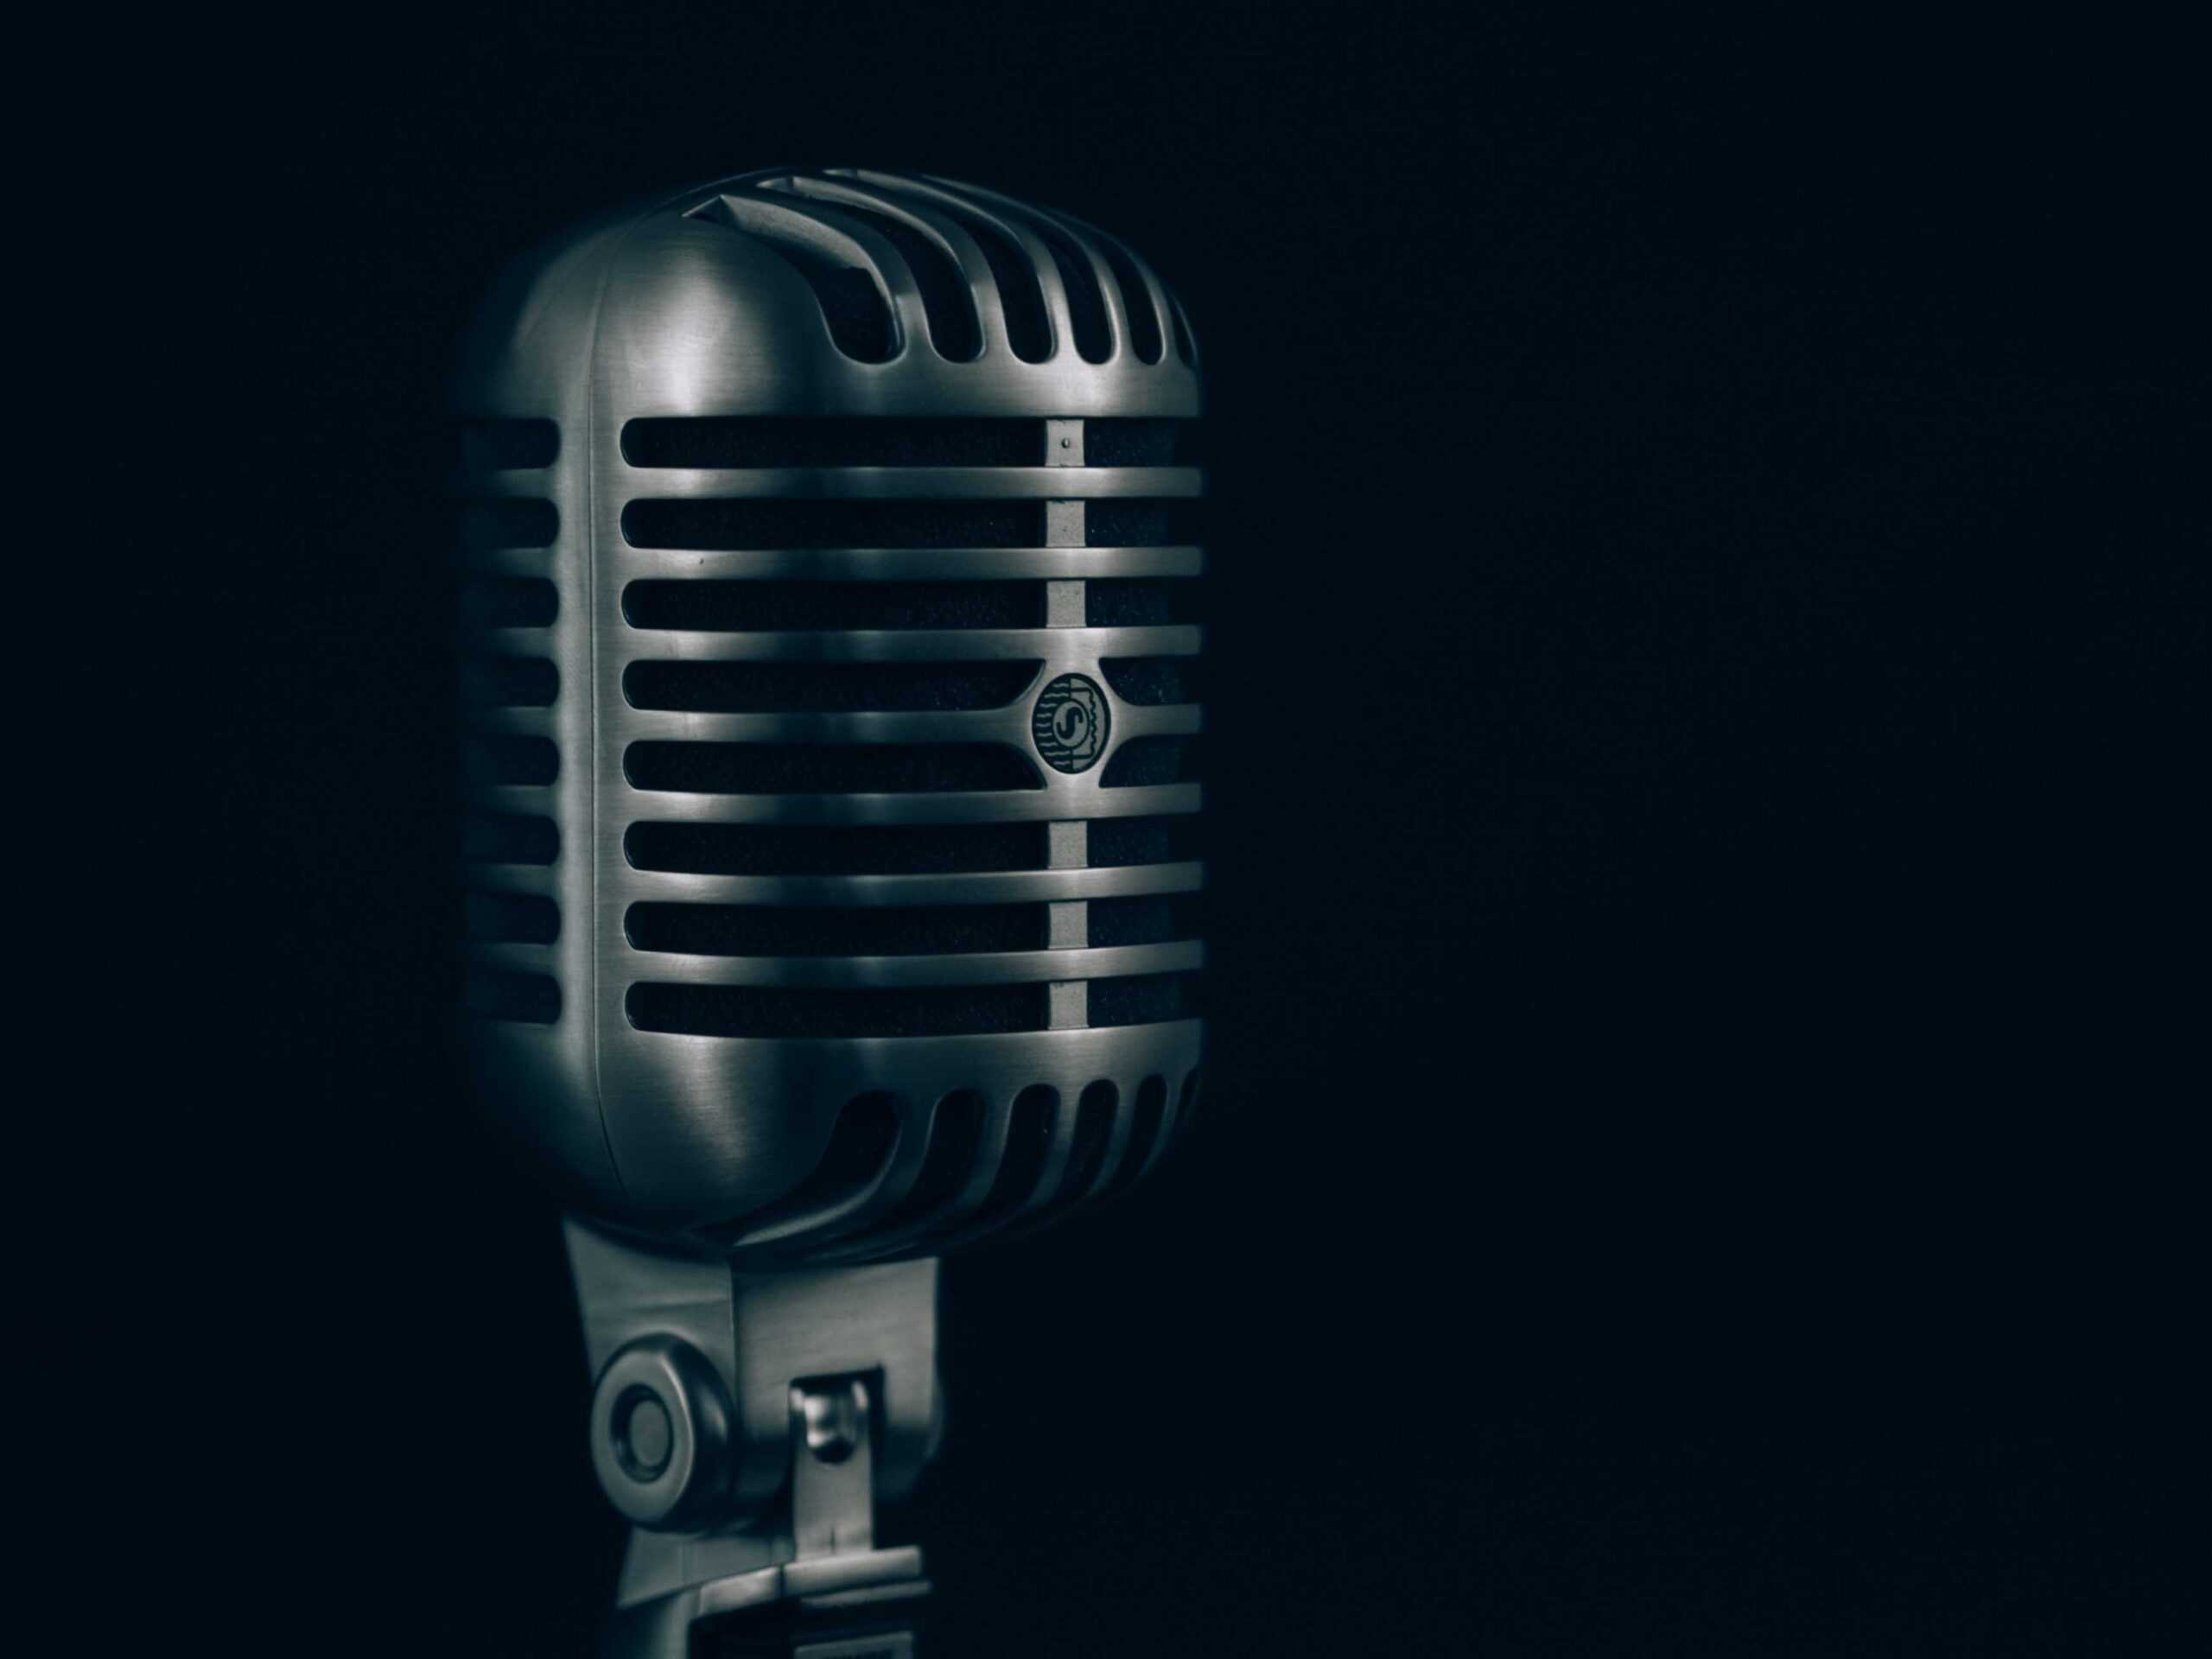 How To Choose The Podcast Microphone That's Right For You